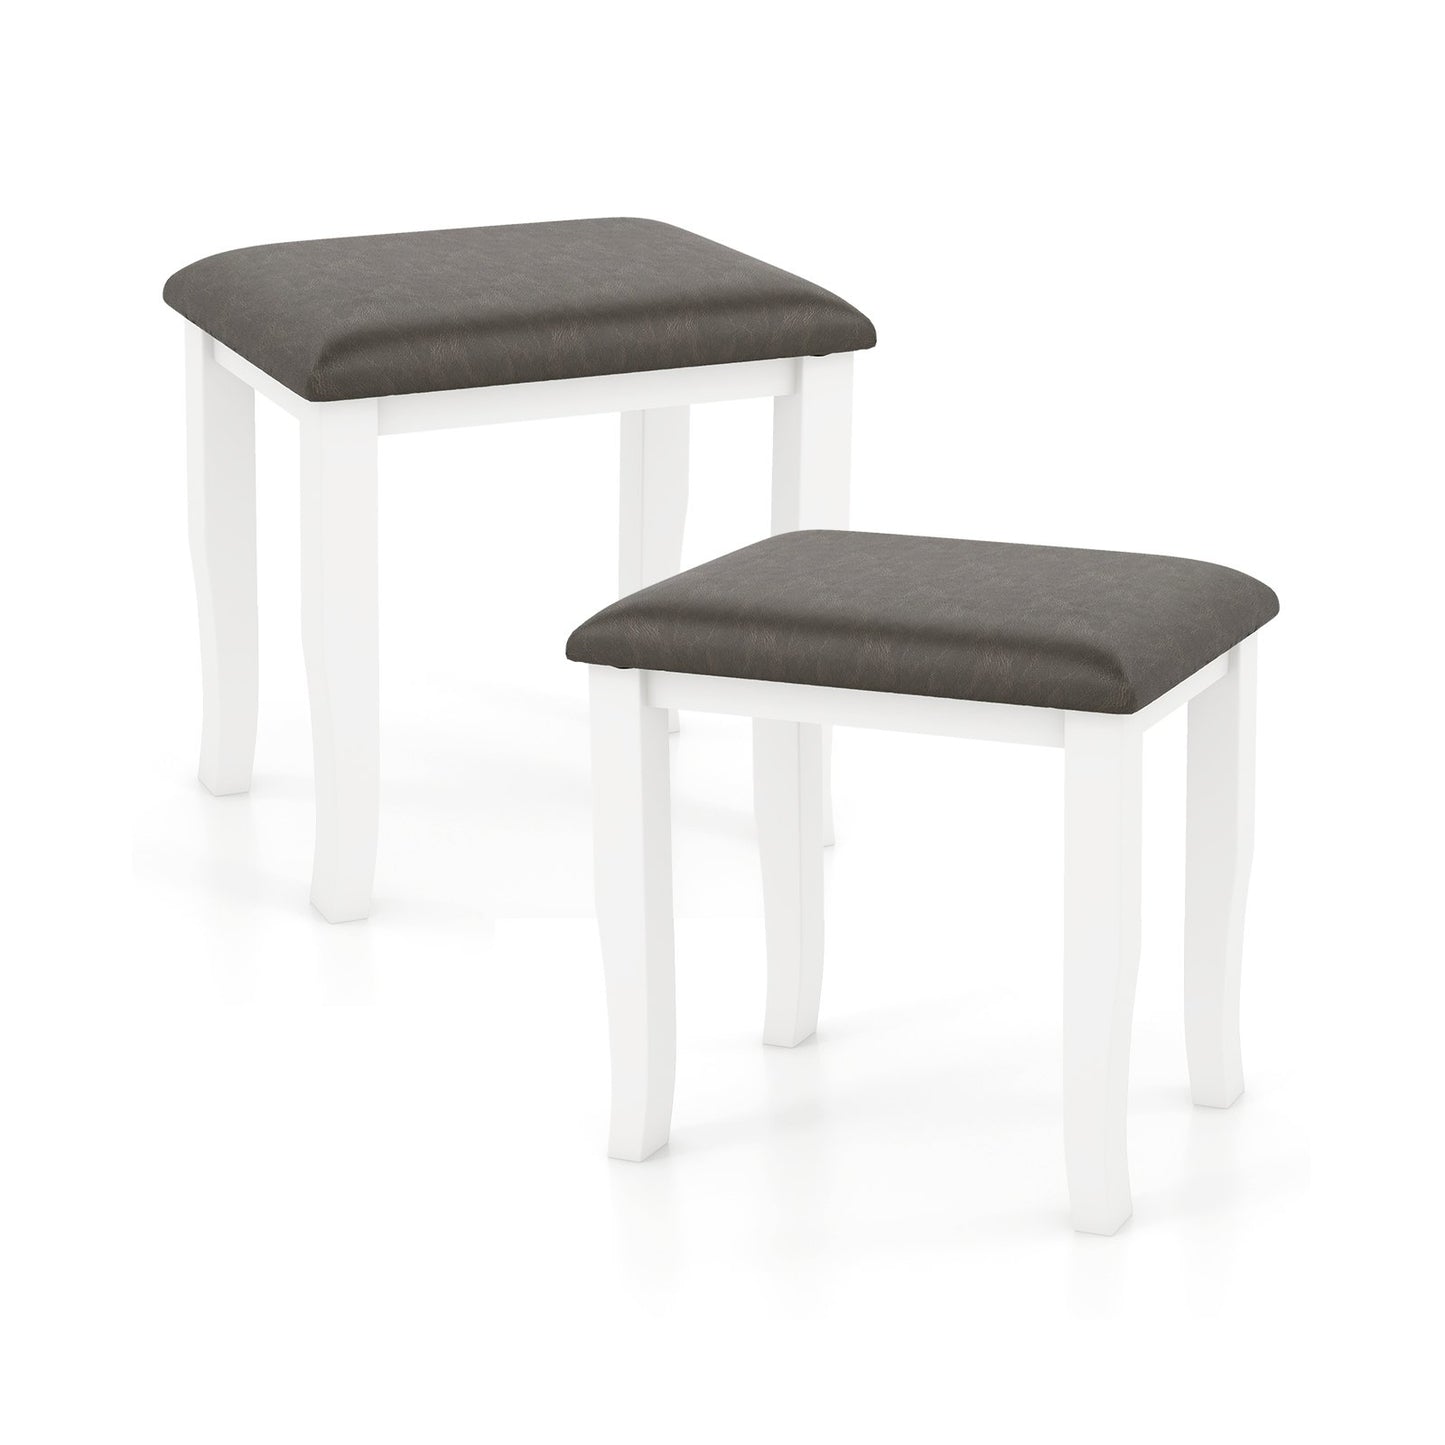 Faux Leather Vanity Stool Chair Set of 2 for Makeup Room and Living Room-Gray and White, Gray & White